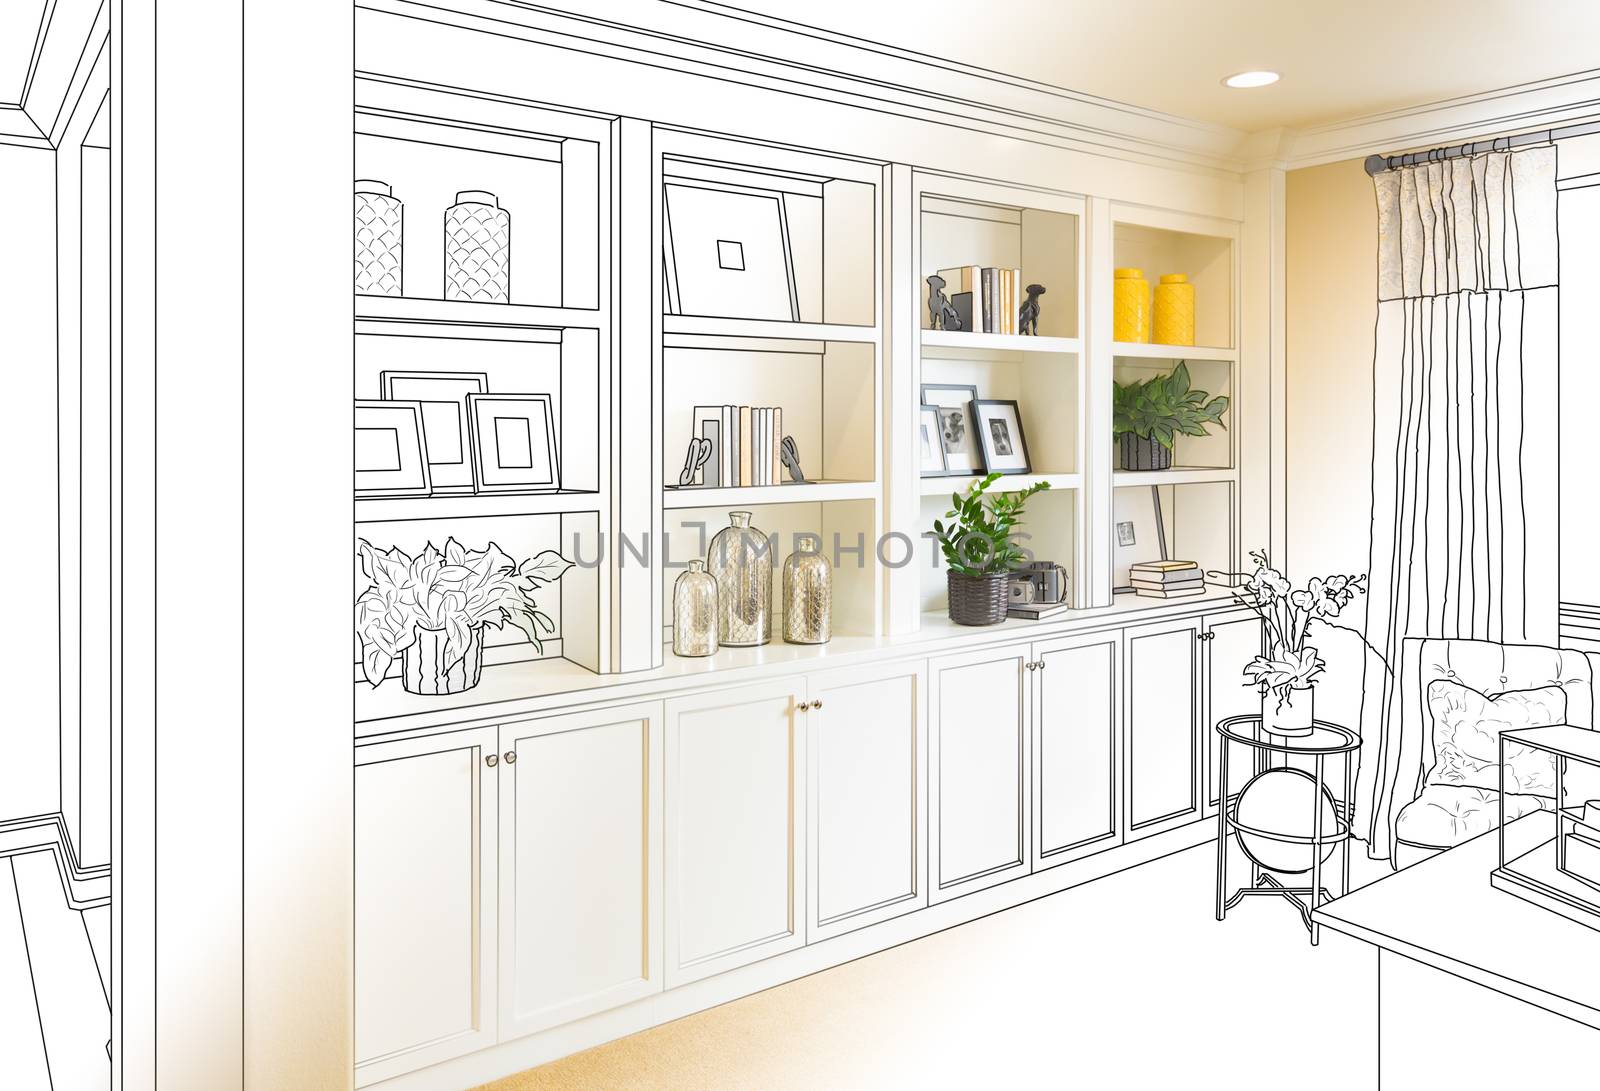 Custom Built-in Shelves and Cabinets Design Drawing Gradating to Finished Photo. by Feverpitched